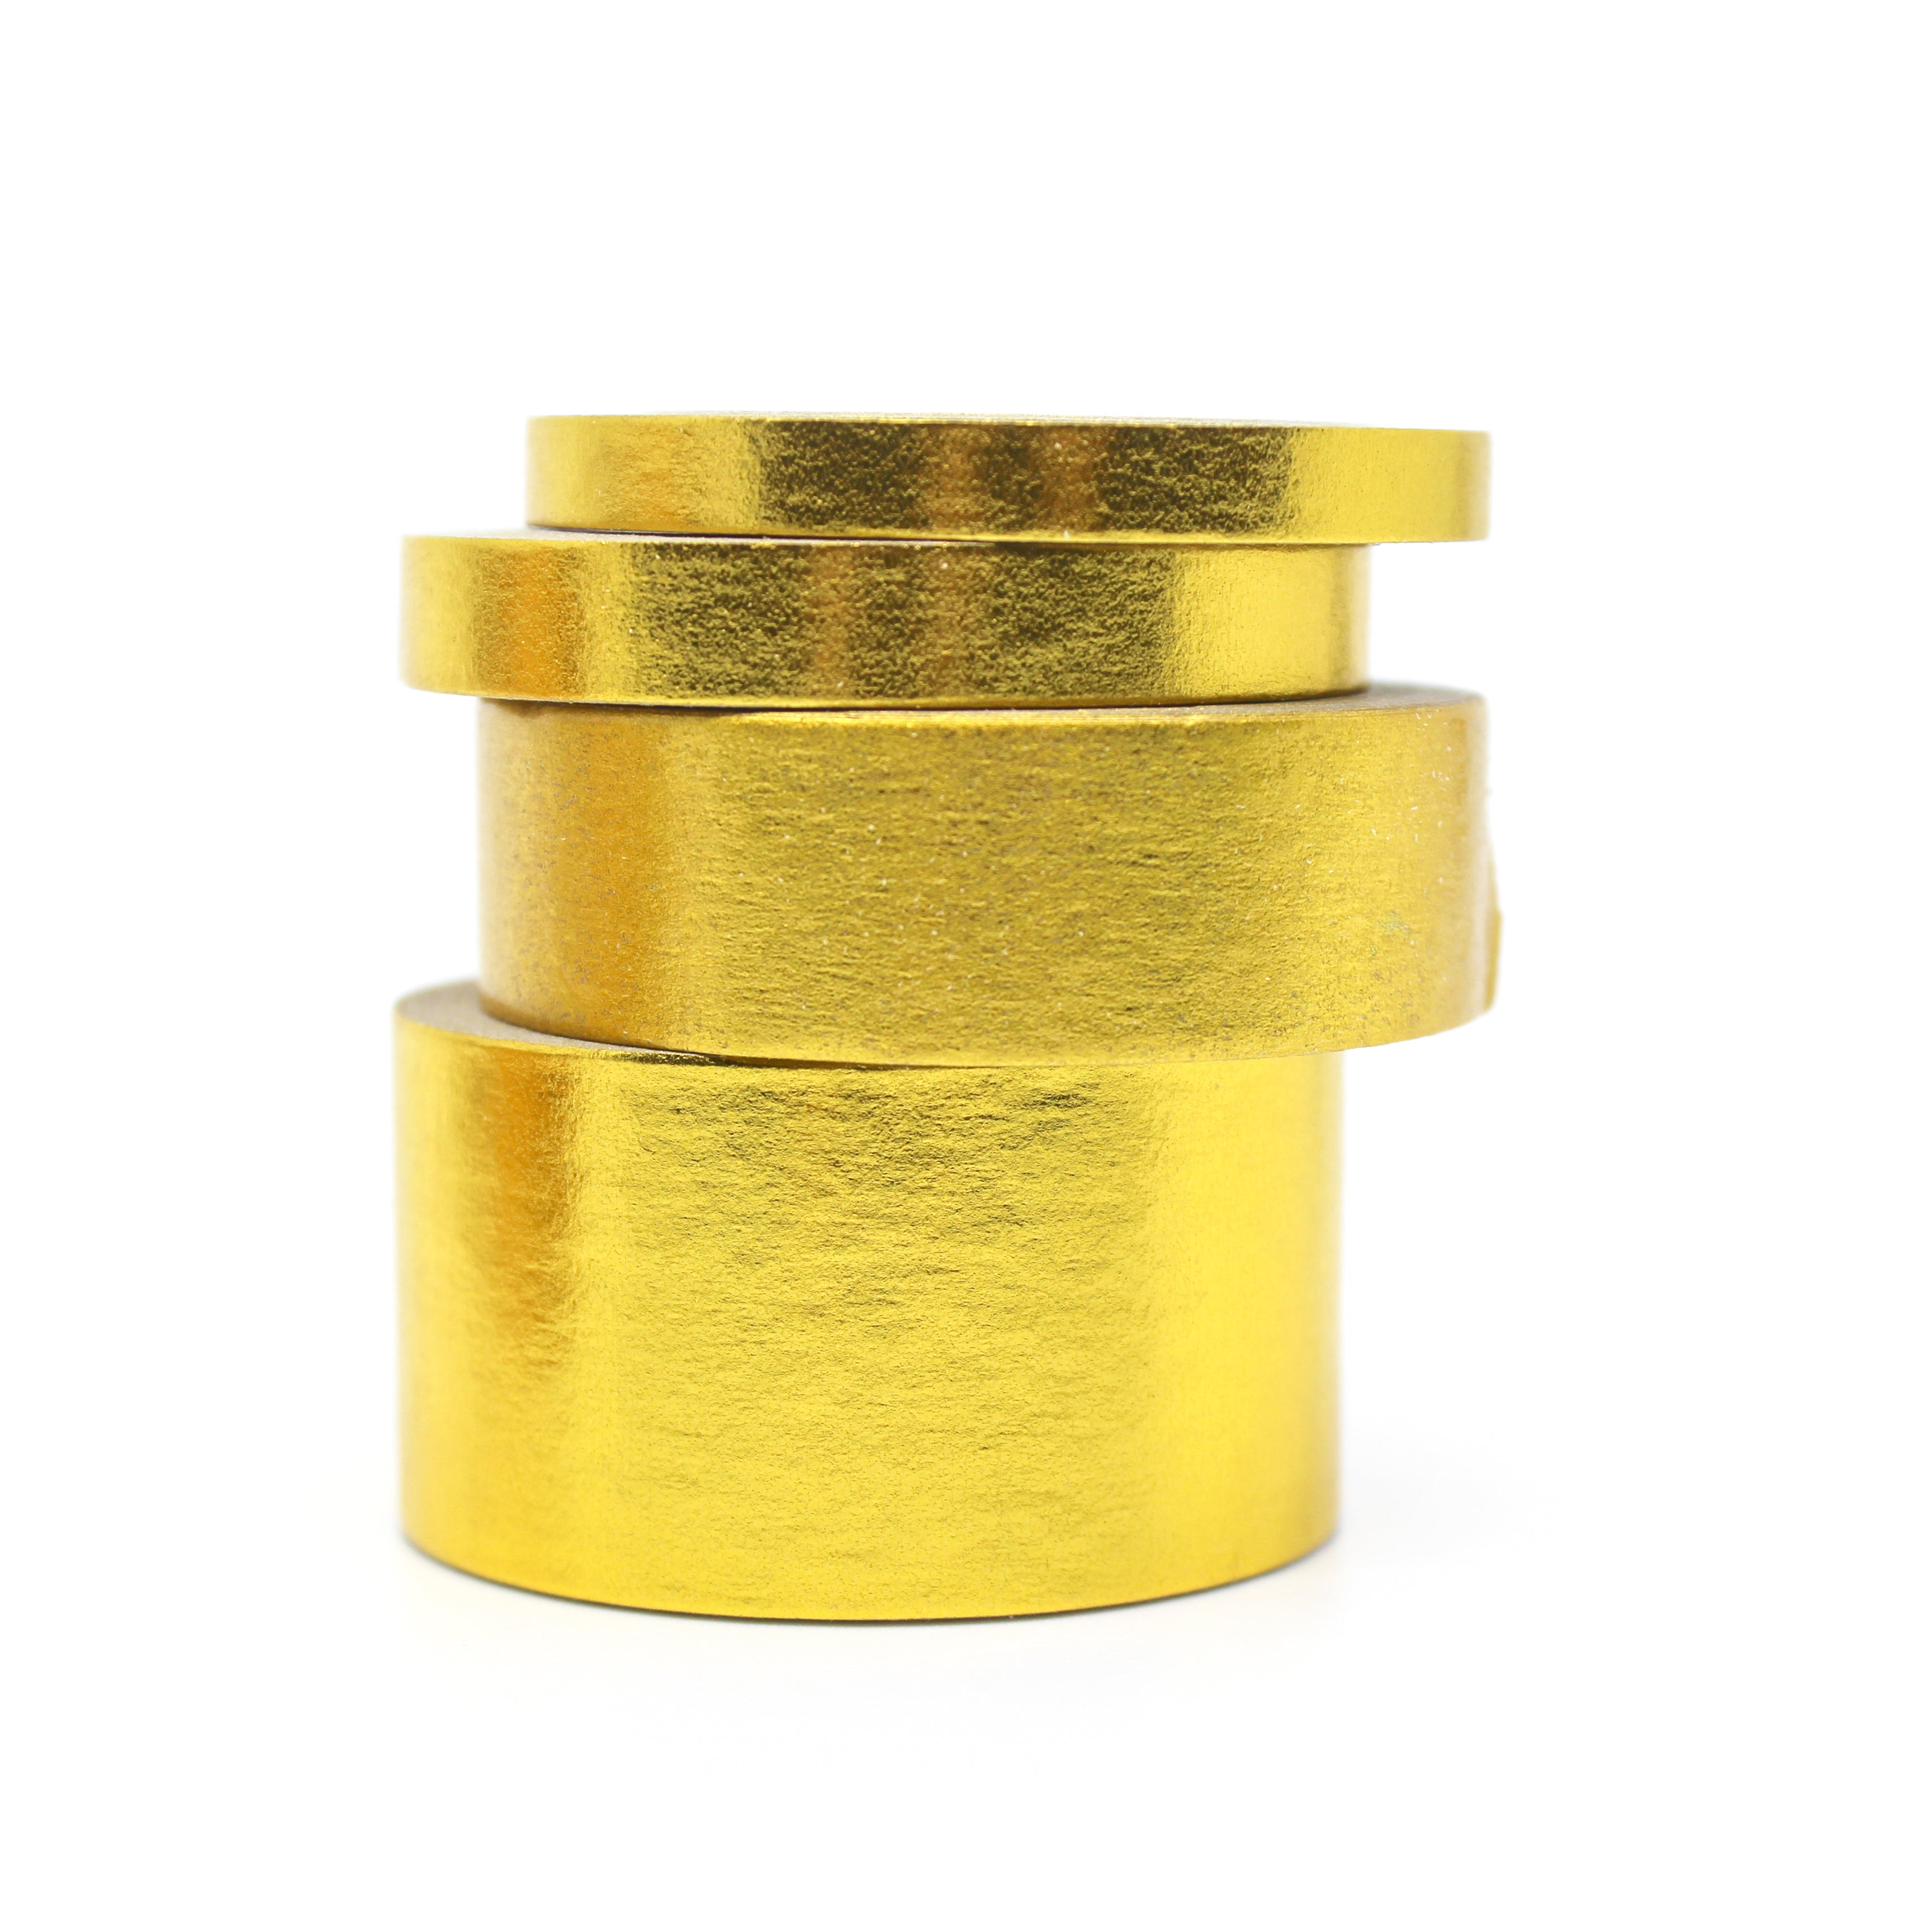 Elevate your creations with our captivating solid foil gold washi tape, showcasing a smooth and shiny surface in a radiant gold color, perfect for adding a touch of opulence and sophistication. These solid foil tapes are sold exclusively at BBB Supplies Craft Shop.